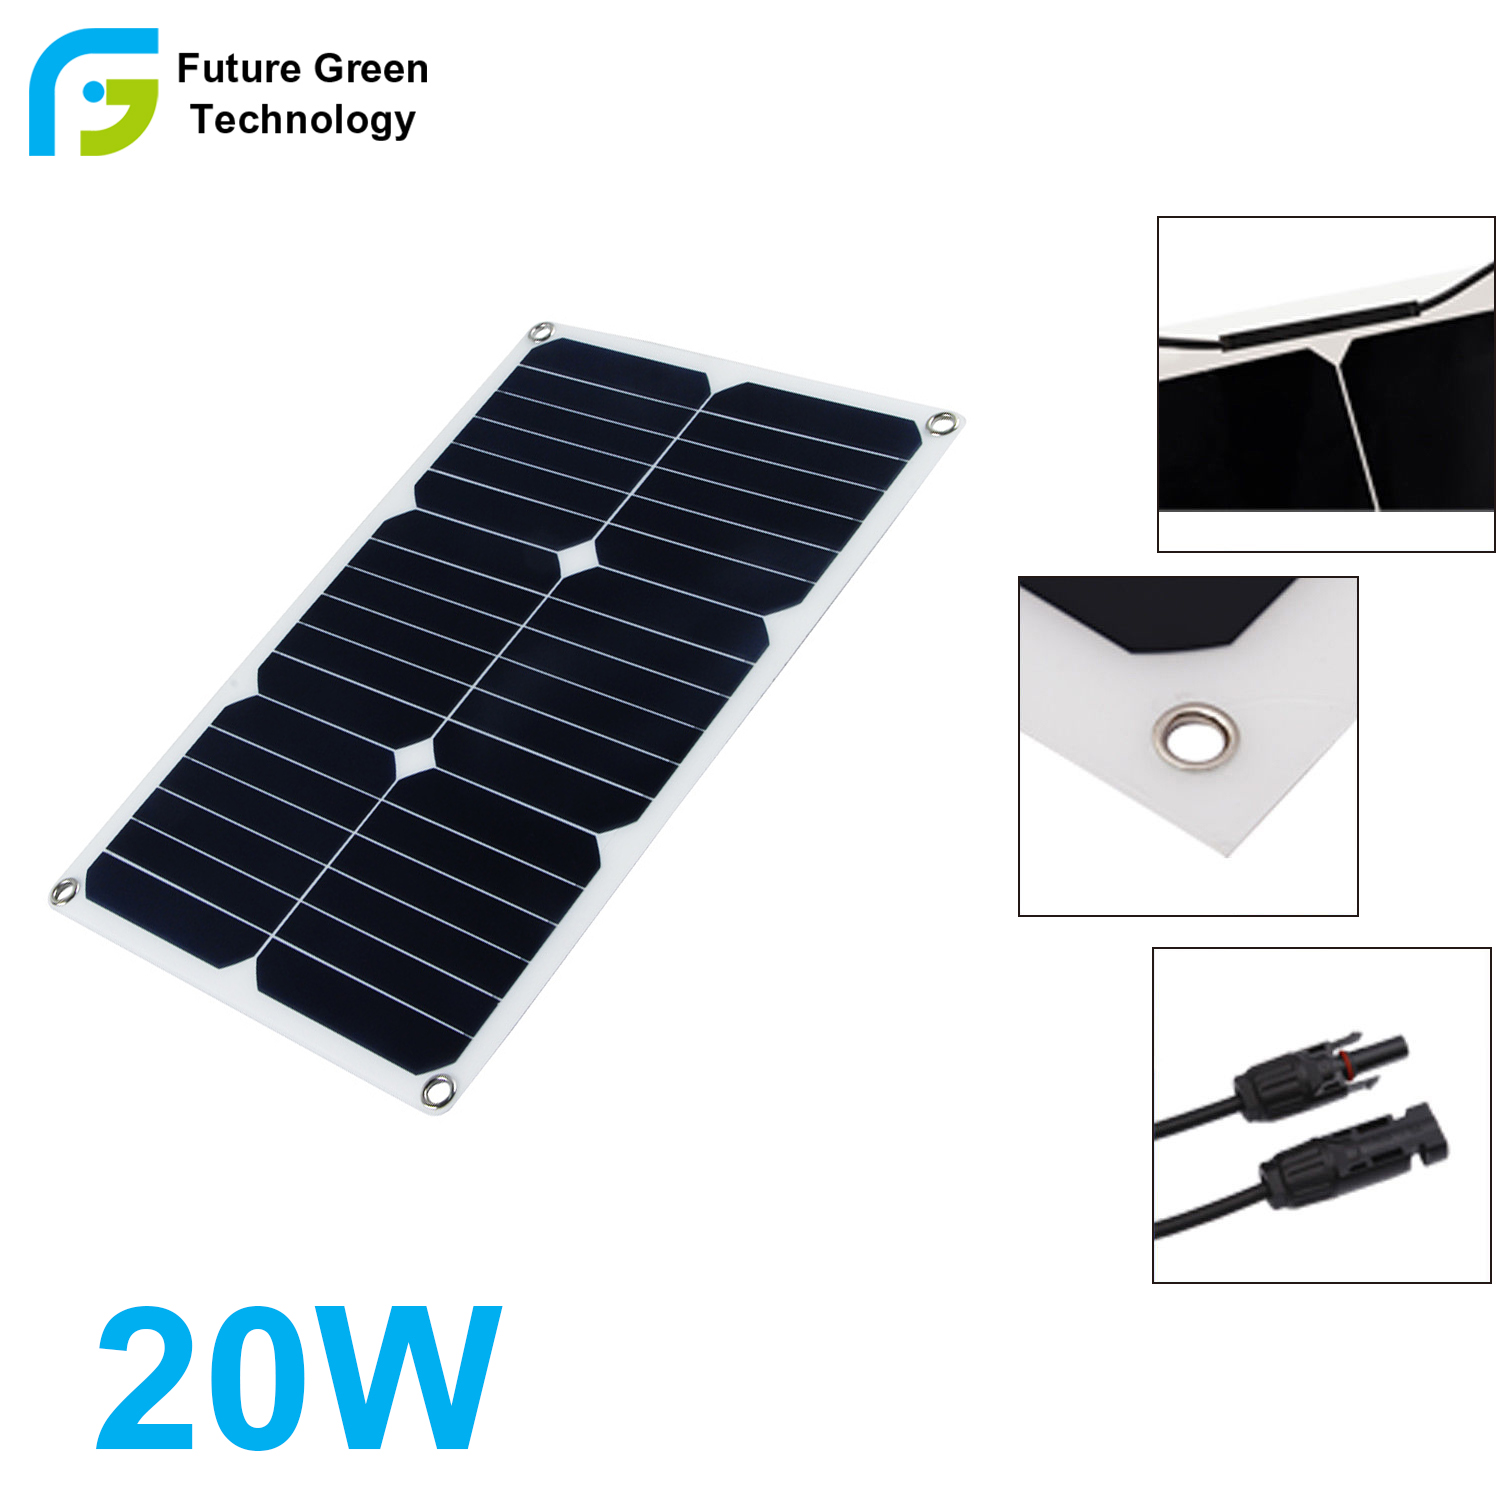 flexible solar panels, flexible solar panels Suppliers and Manufacturers at